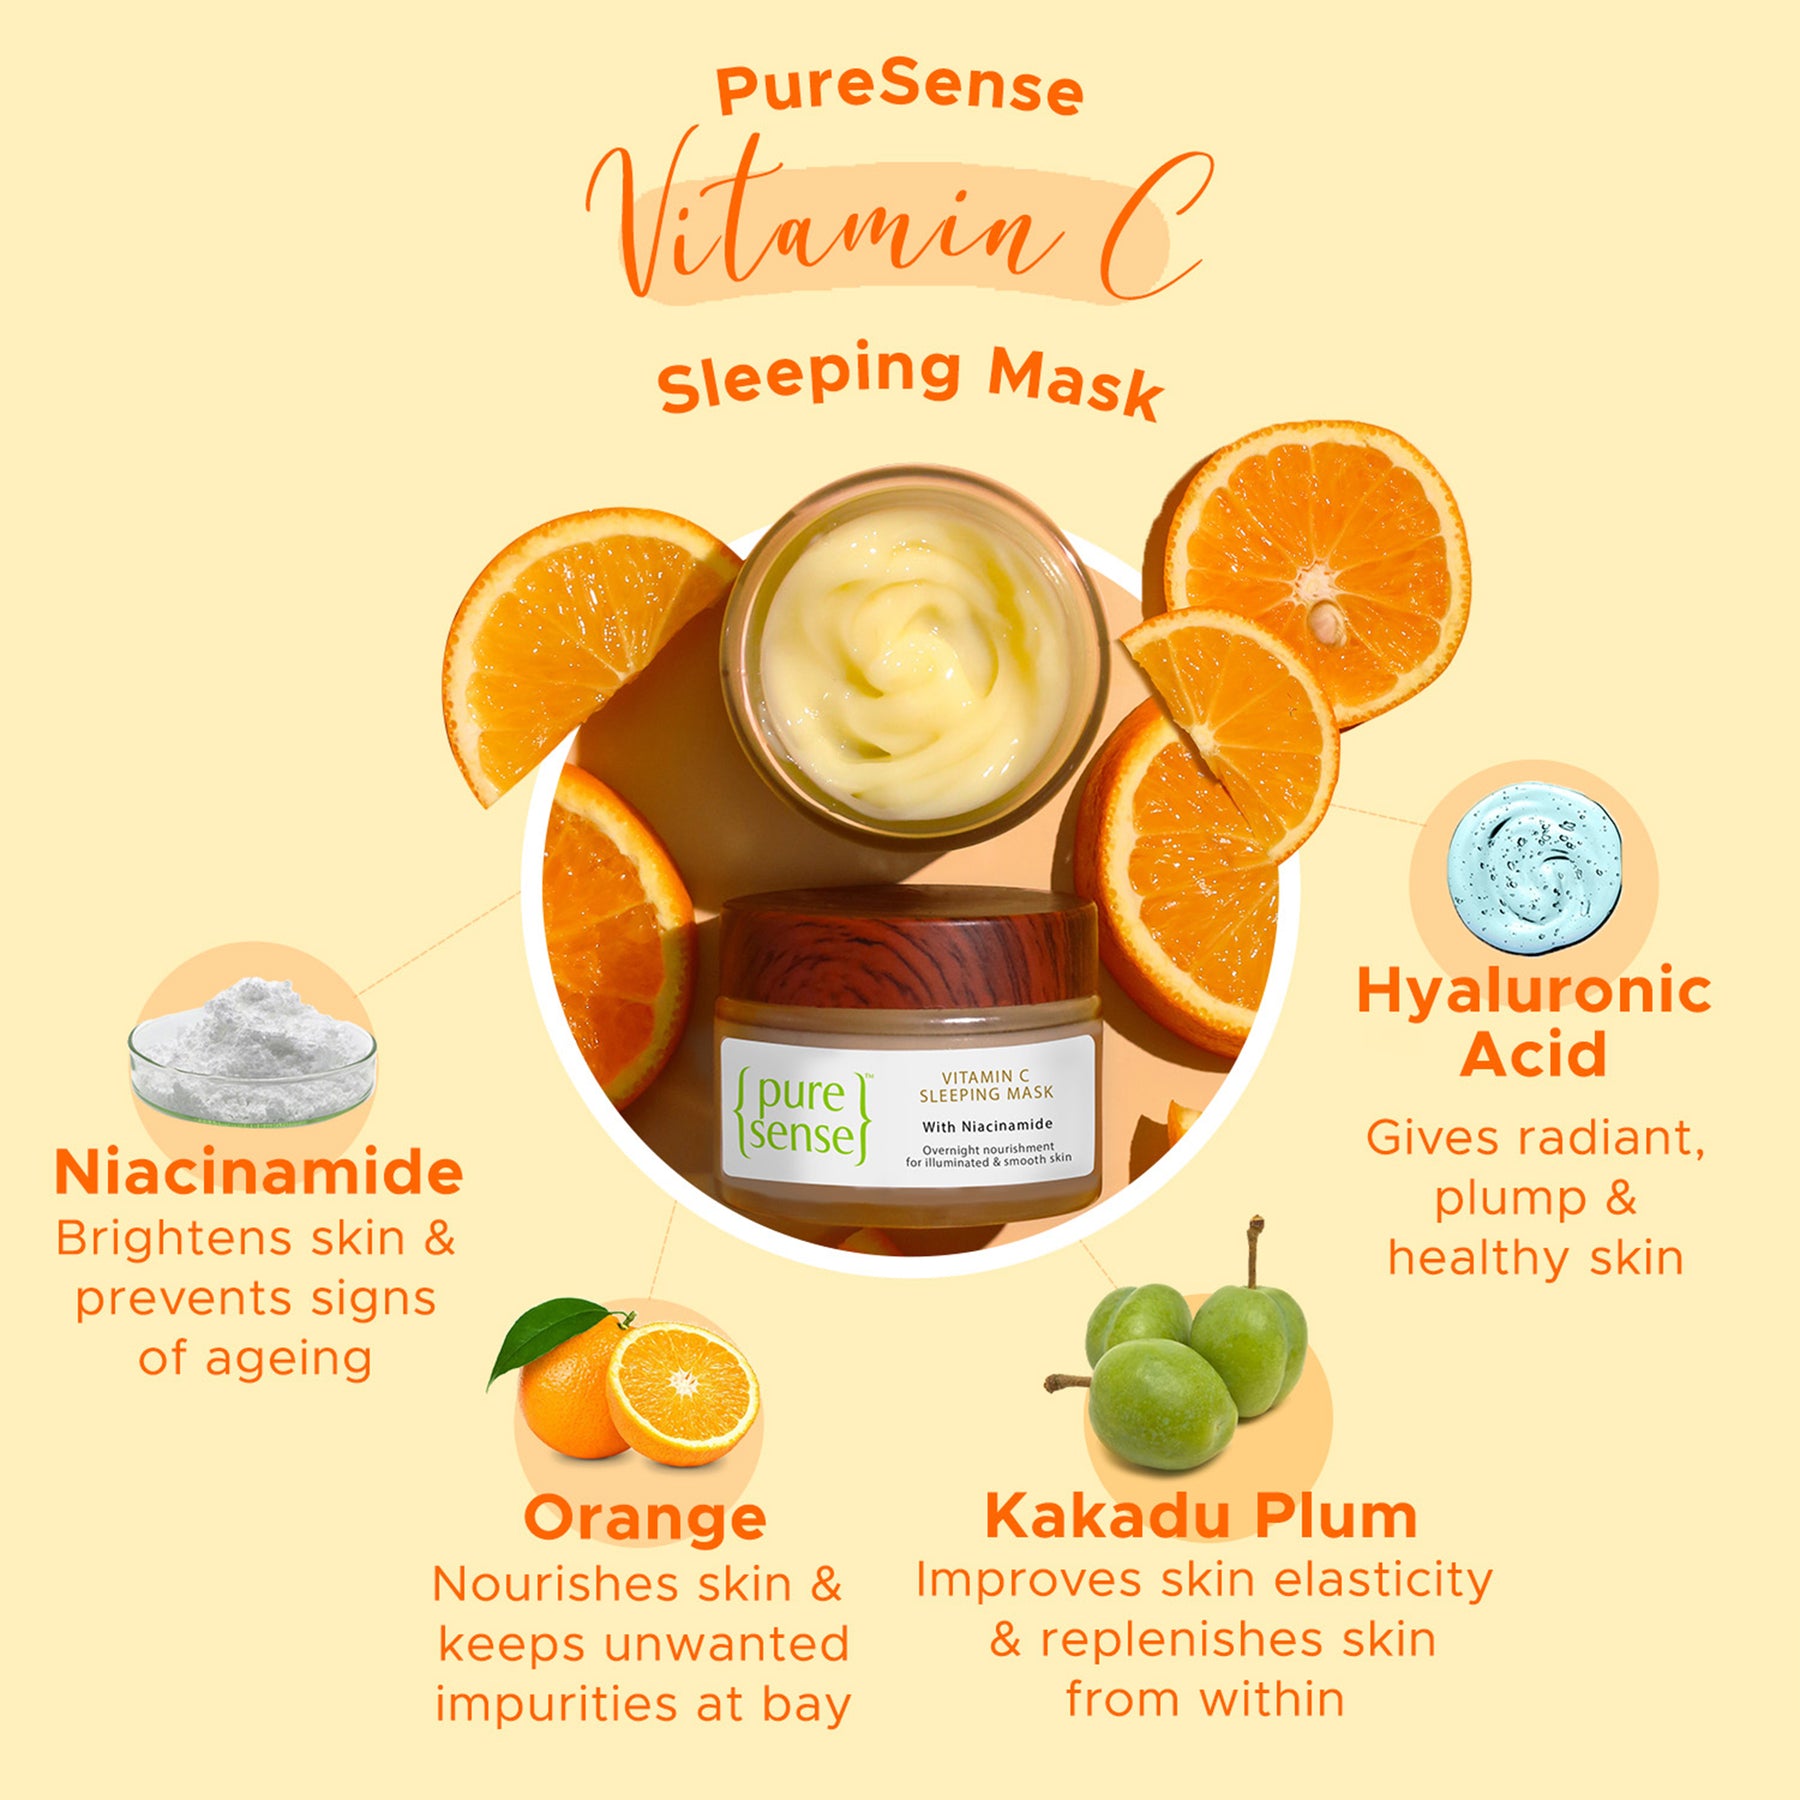 Vitamin C Sleeping Mask | Paraben & Sulphate Free |  From the makers of Parachute Advansed | 50g - PureSense